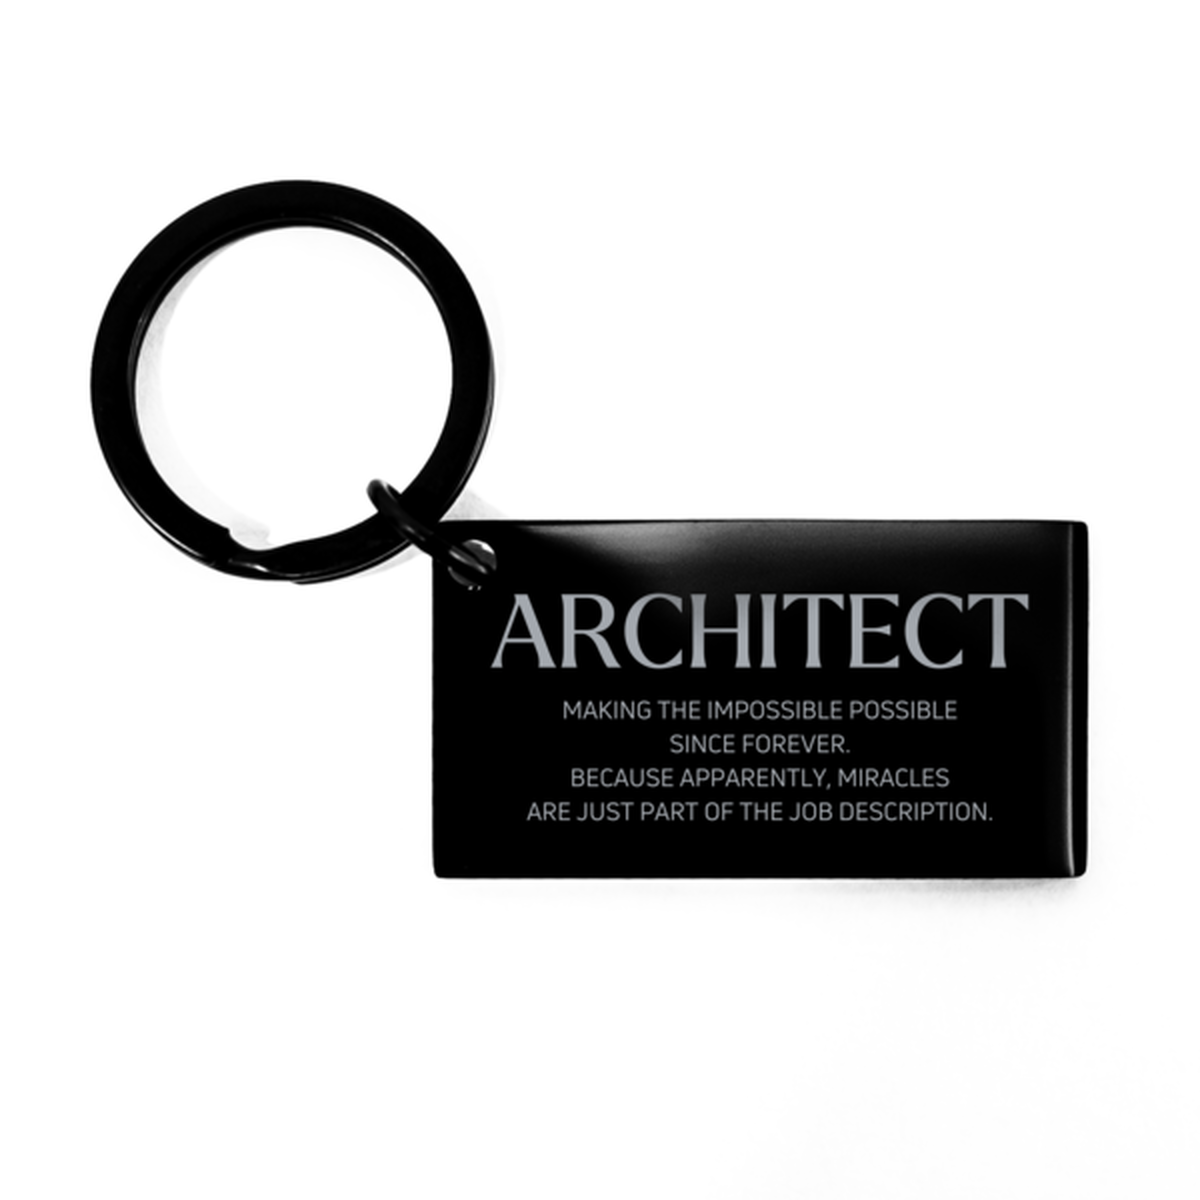 Funny Architect Gifts, Miracles are just part of the job description, Inspirational Birthday Keychain For Architect, Men, Women, Coworkers, Friends, Boss